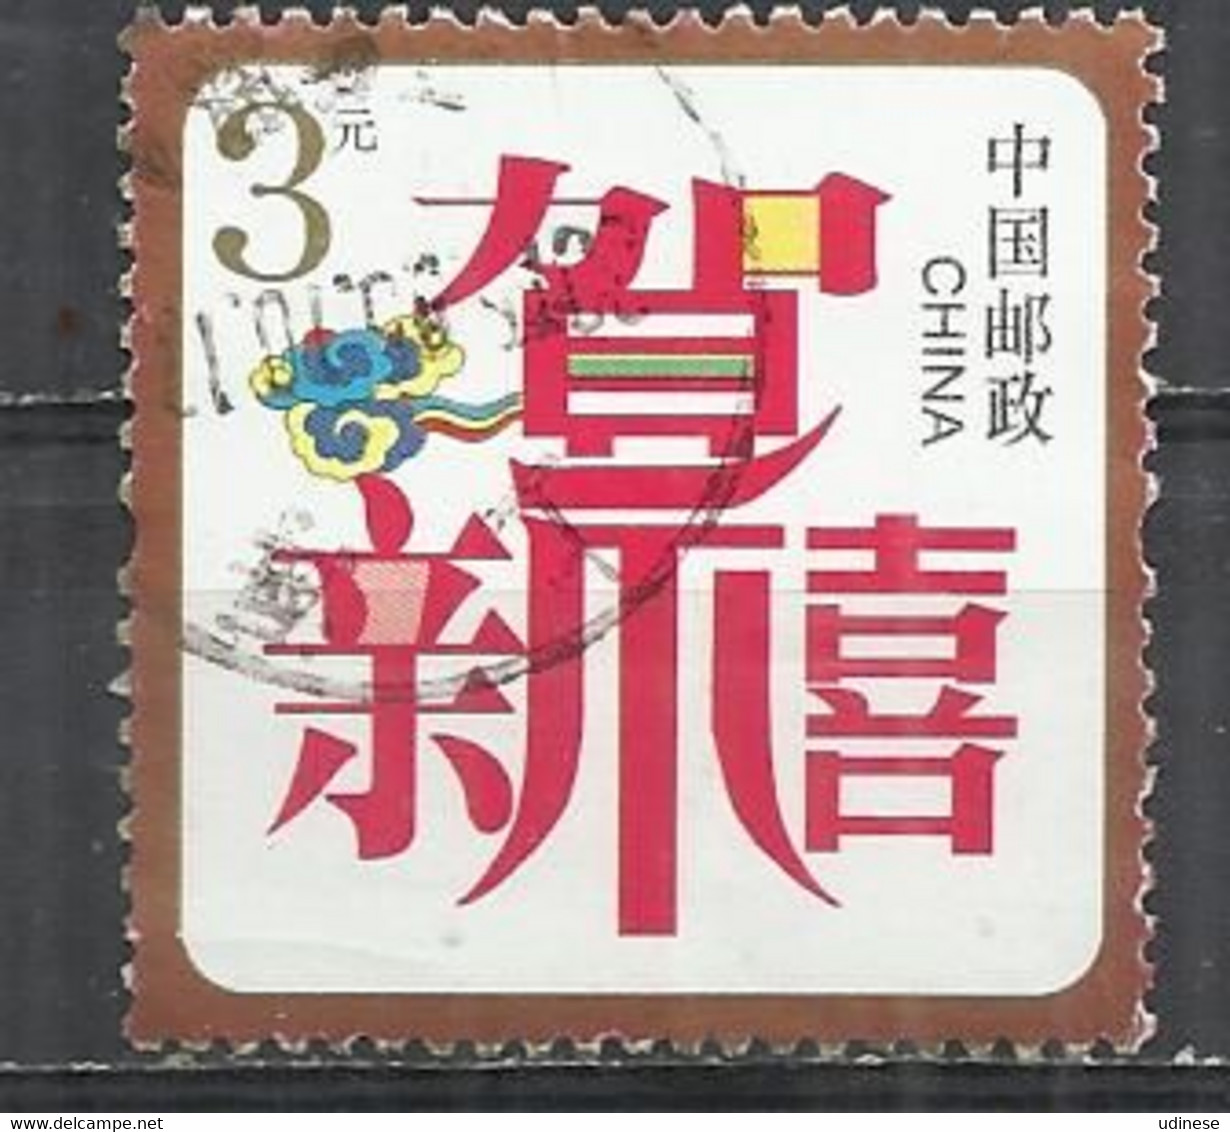 CHINA 2006 - CHINESE CHARACTERS - POSTALLY USED OBLITERE GESTEMPELT USADO - Gebraucht